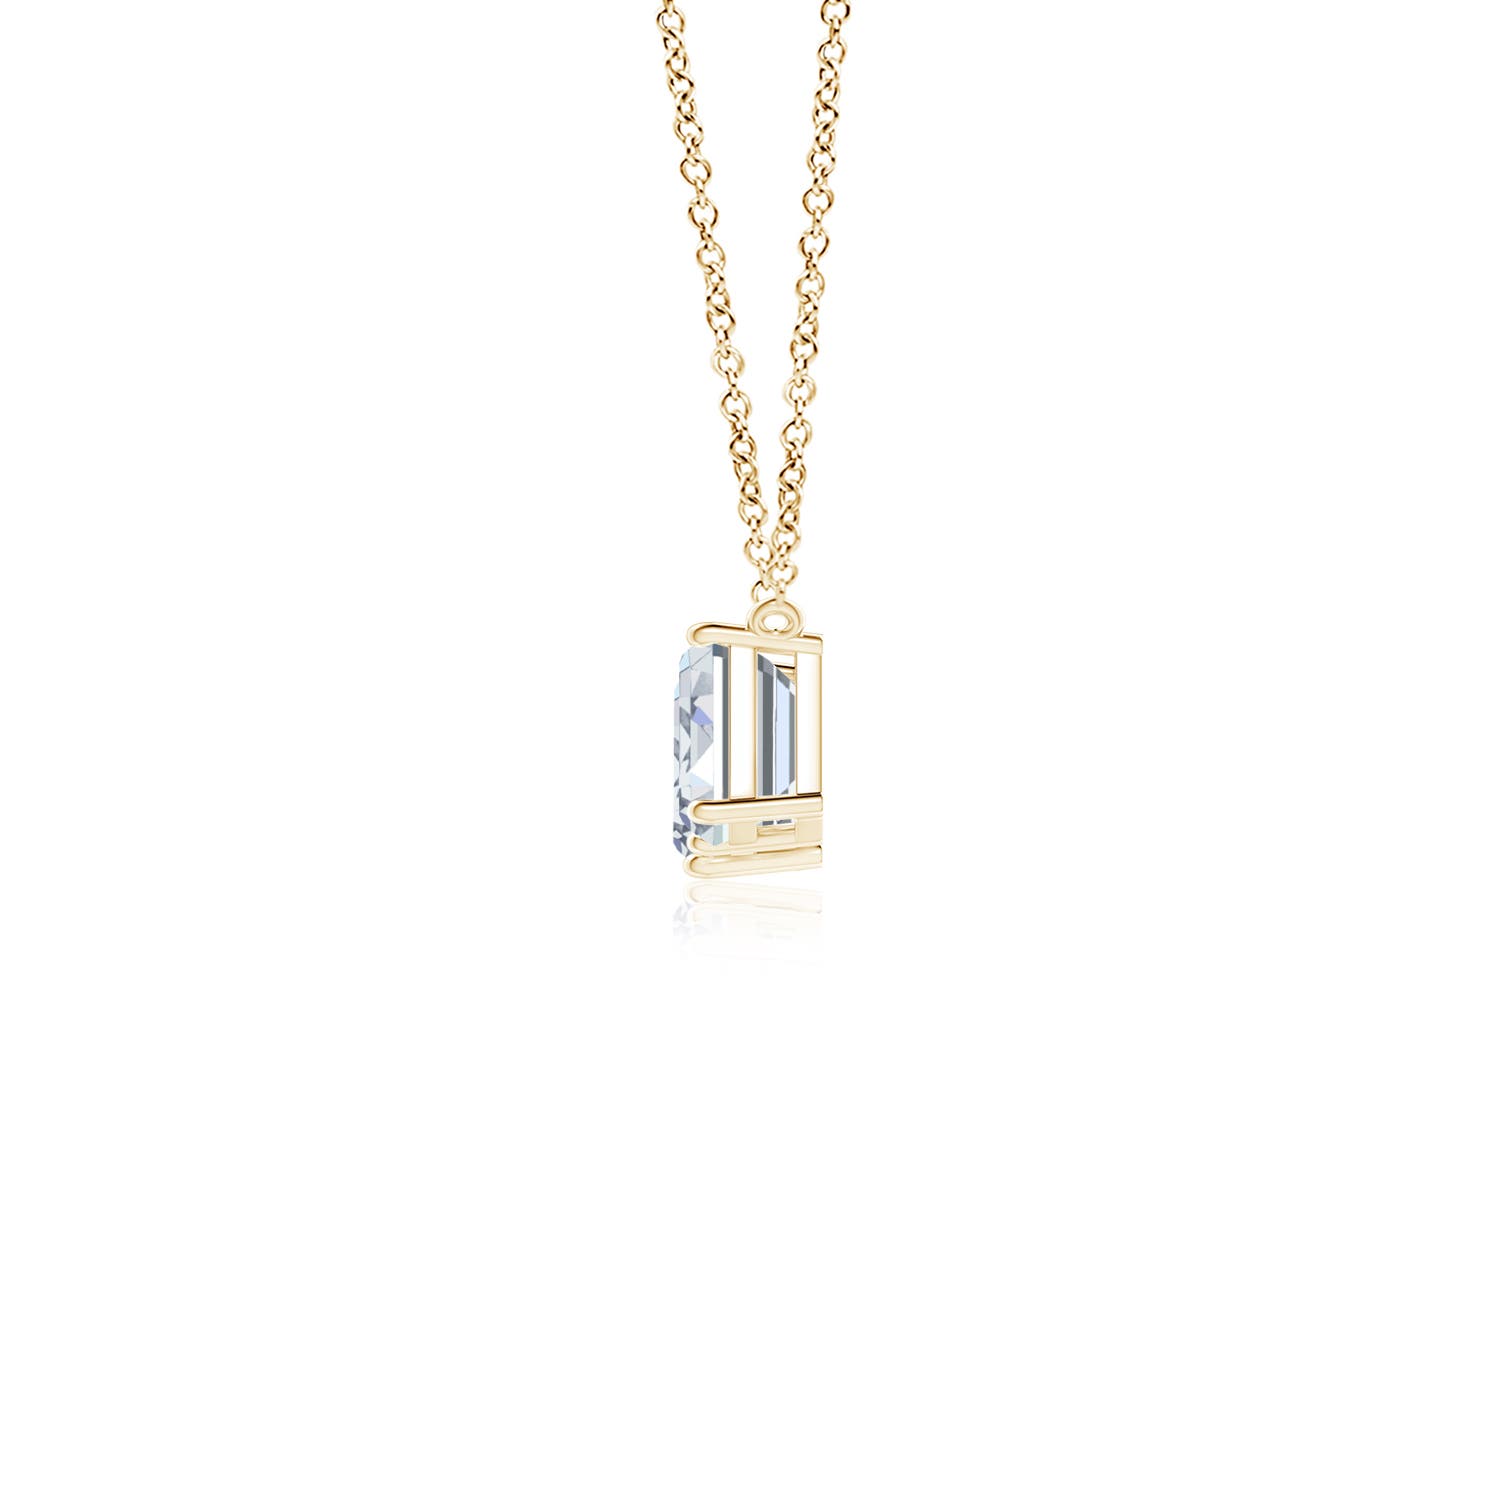 H, SI2 / 2.57 CT / 14 KT Yellow Gold